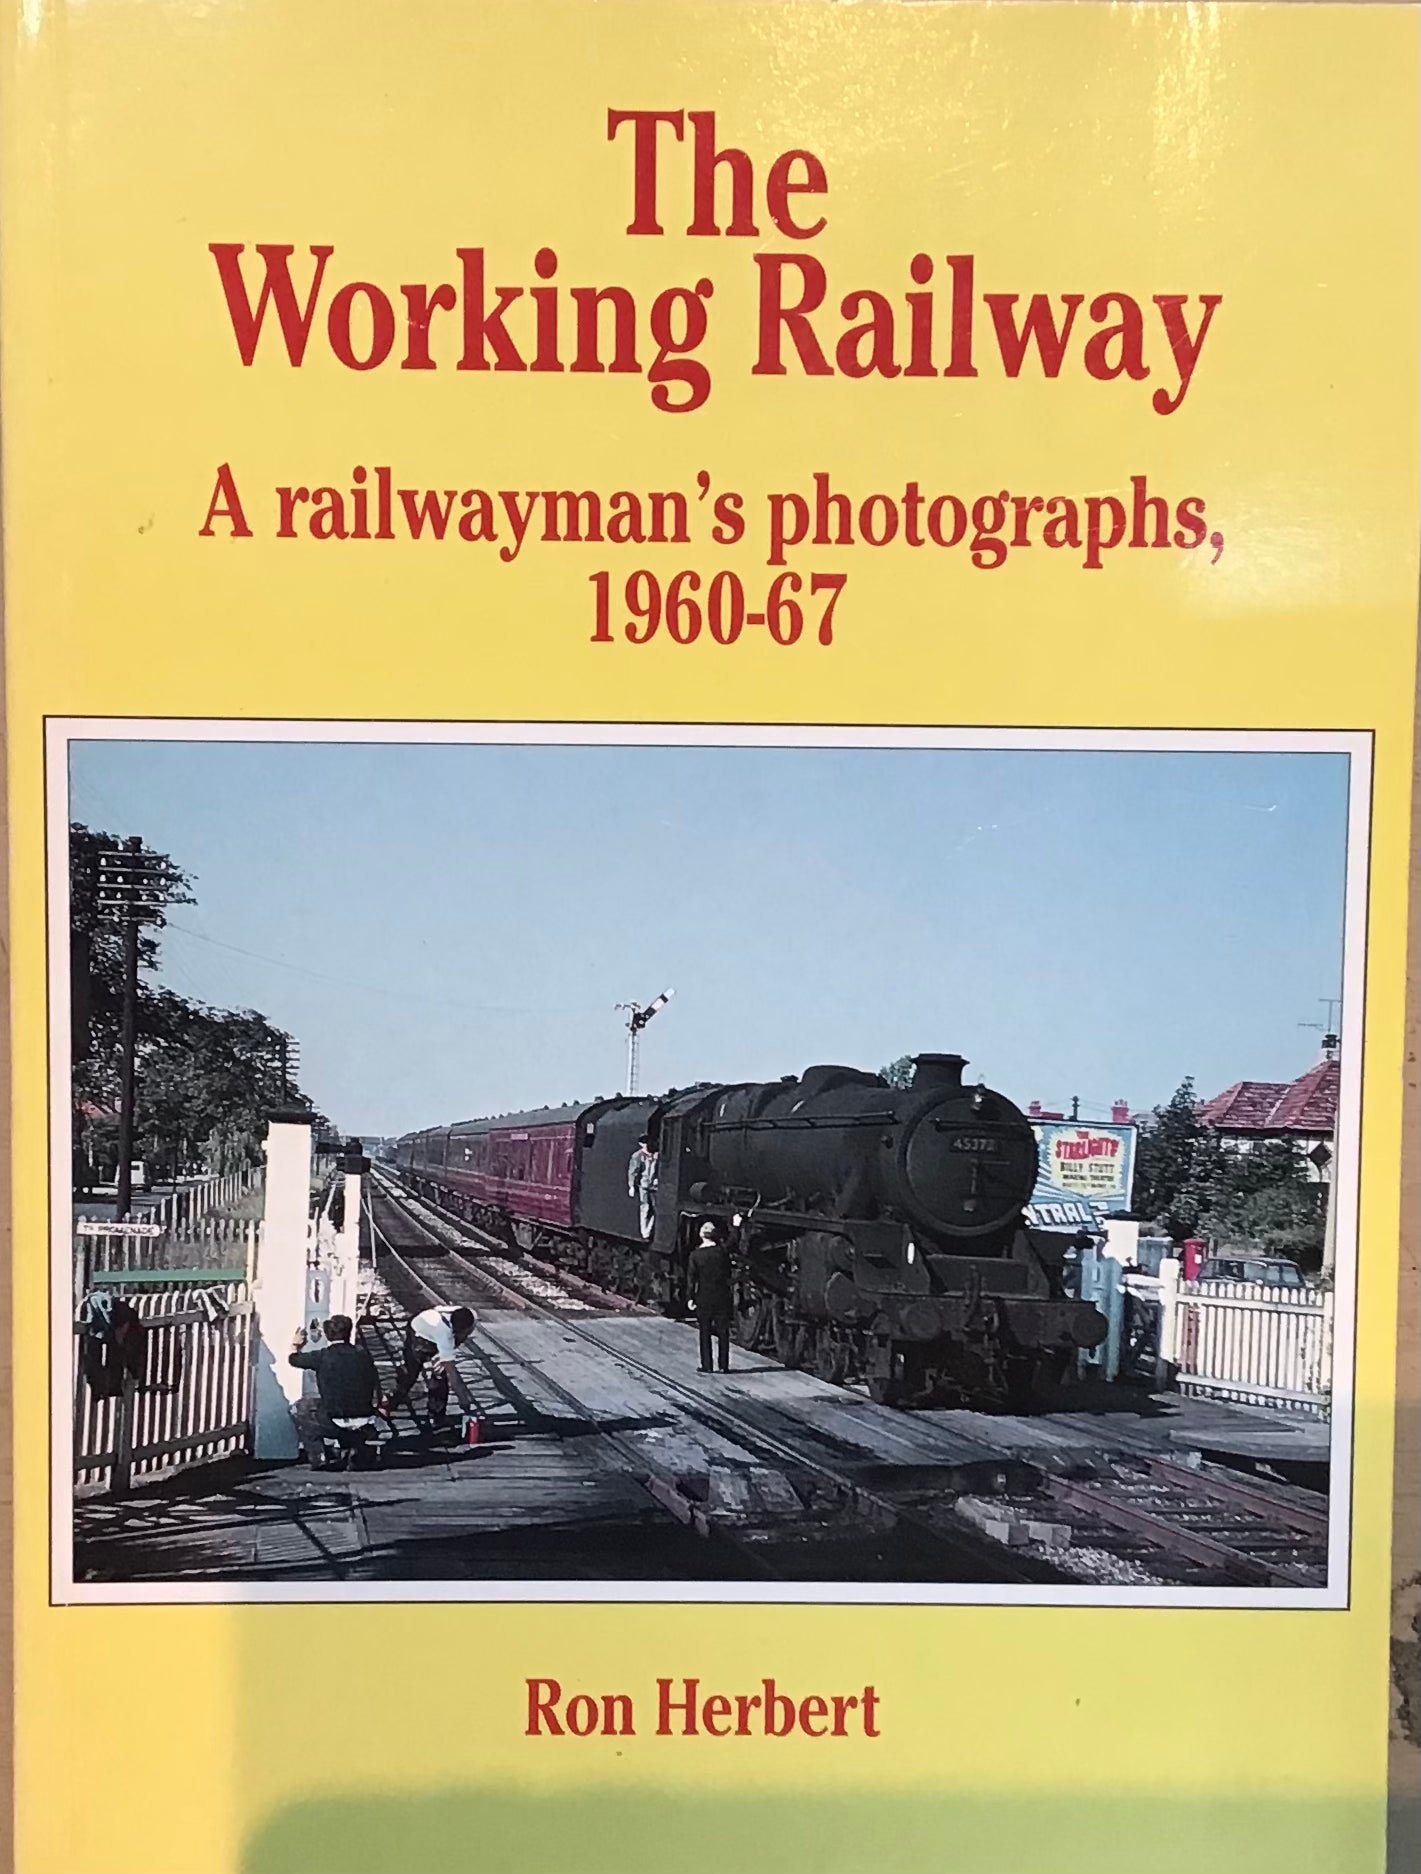 The Working Railway: A Railwayman's Photographs, 1960-67 by Ron Herbert - Chester Model Centre